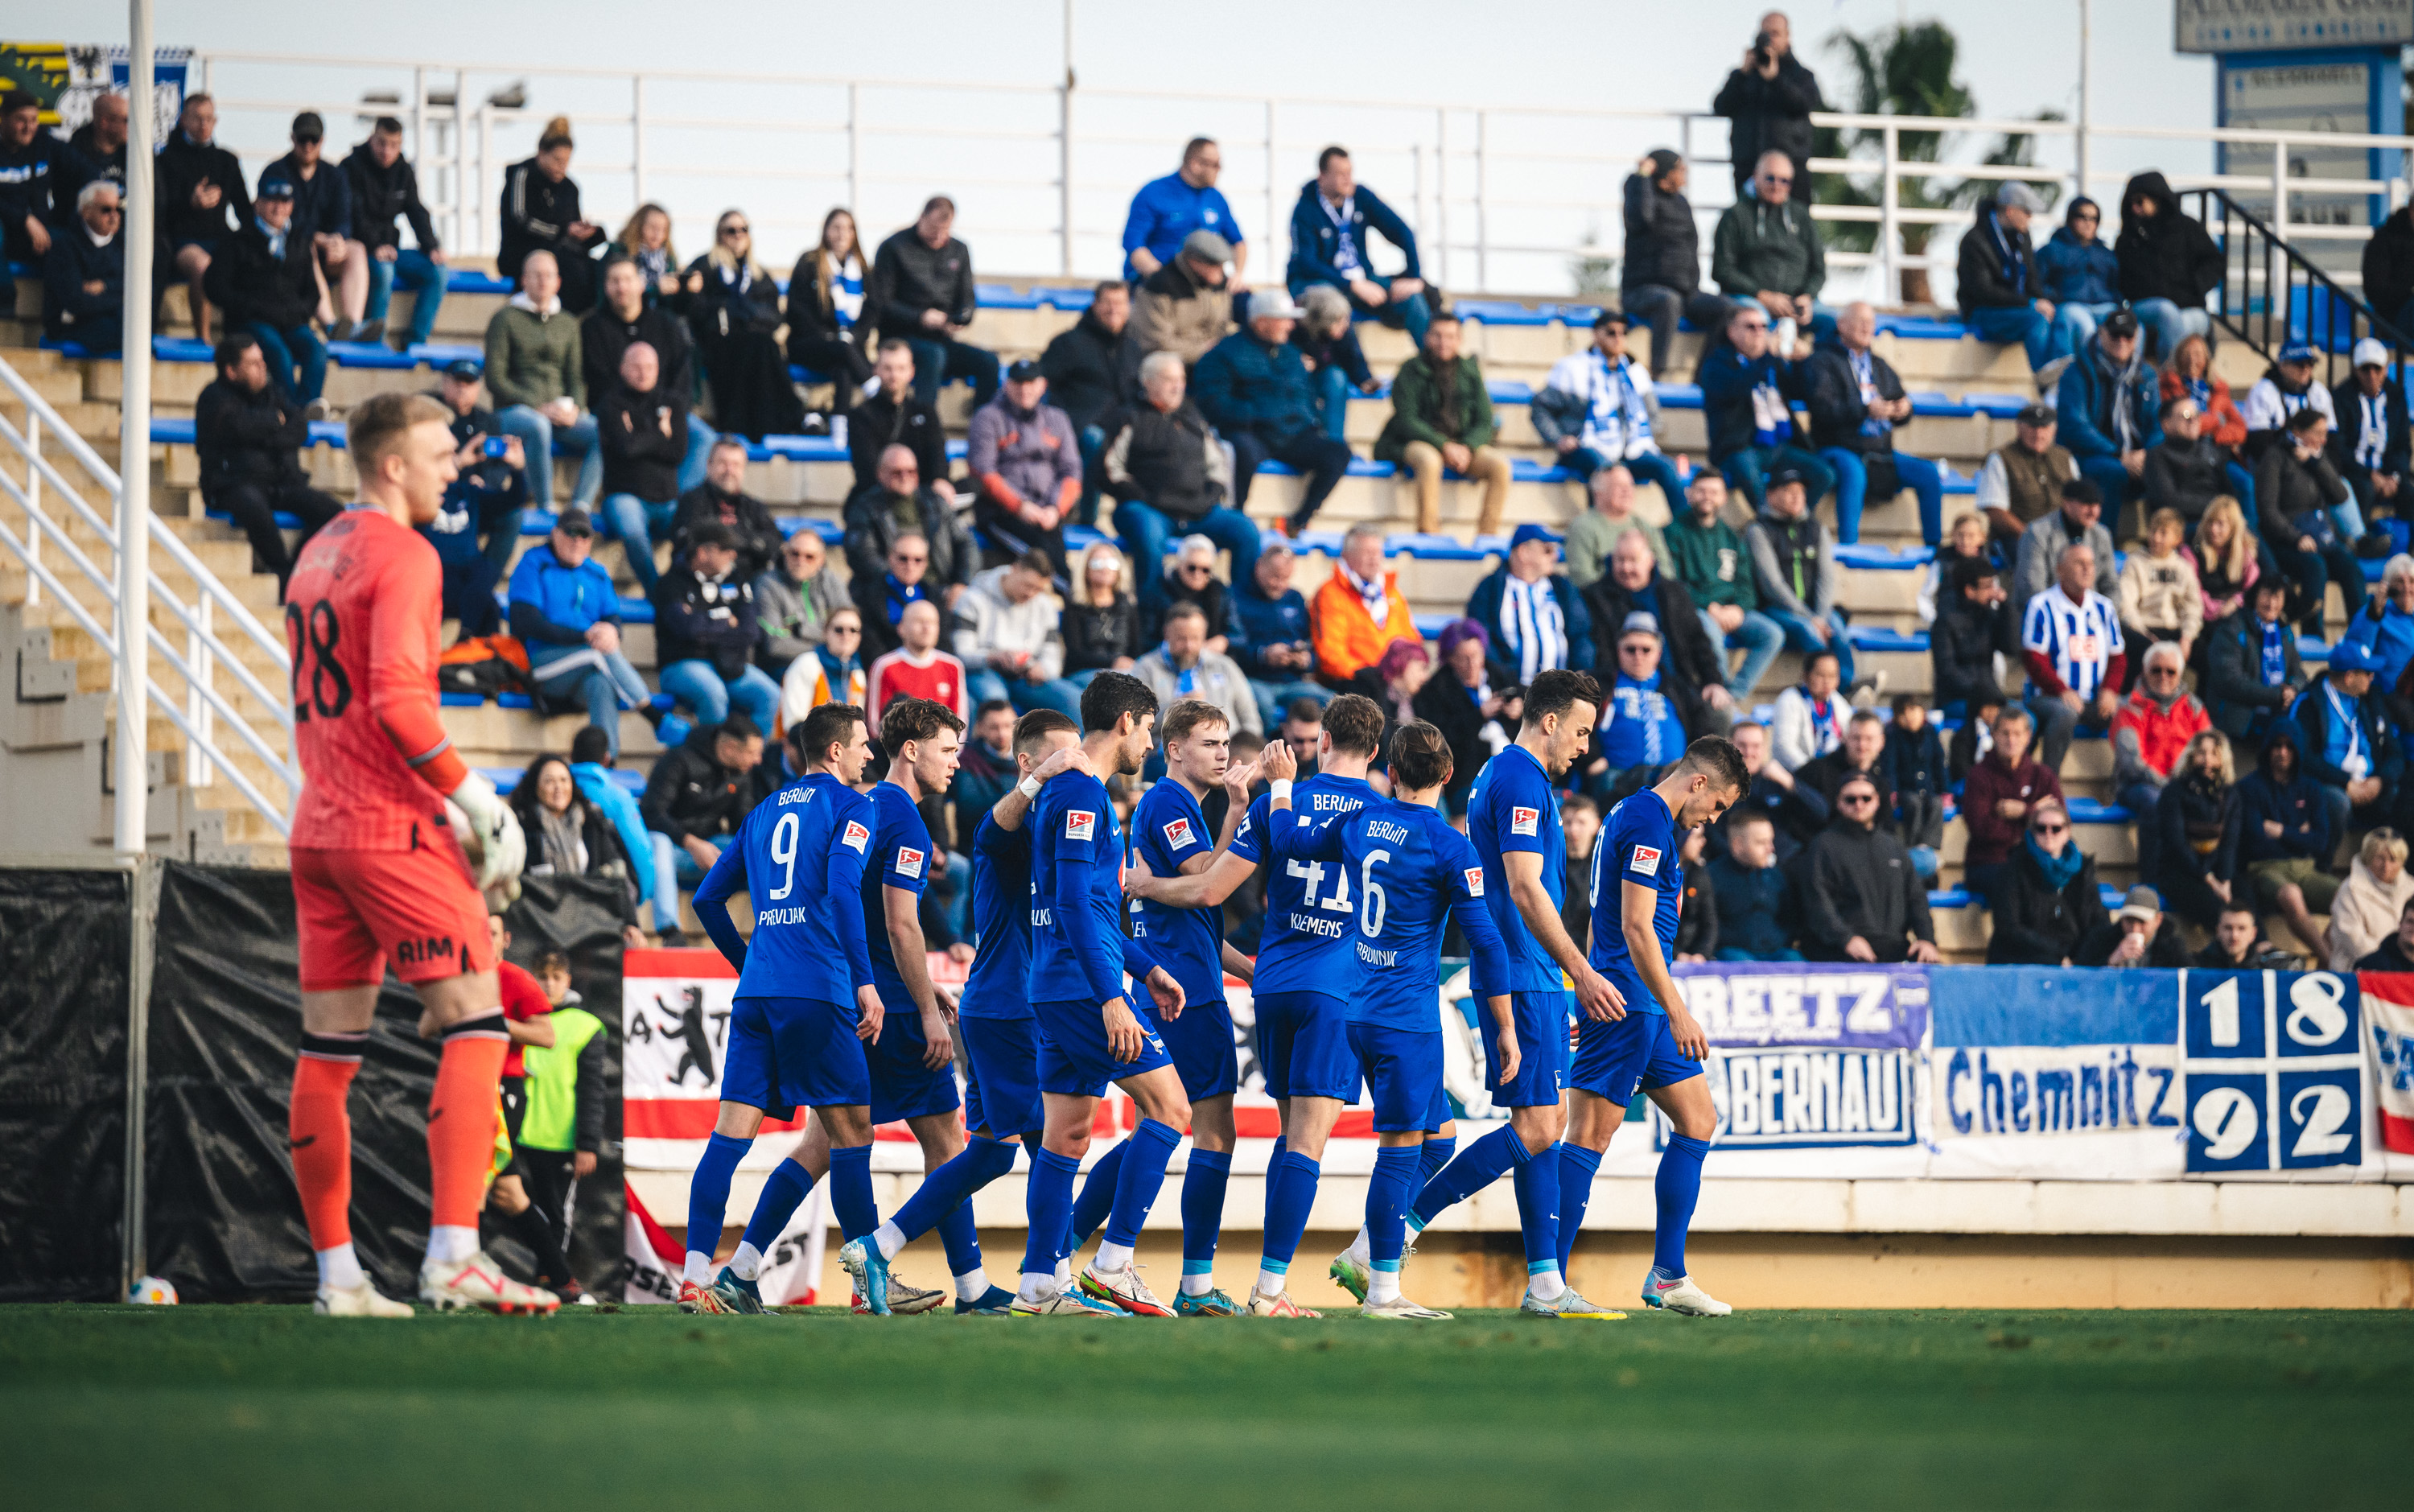 The players celebrate Kempf's goal.